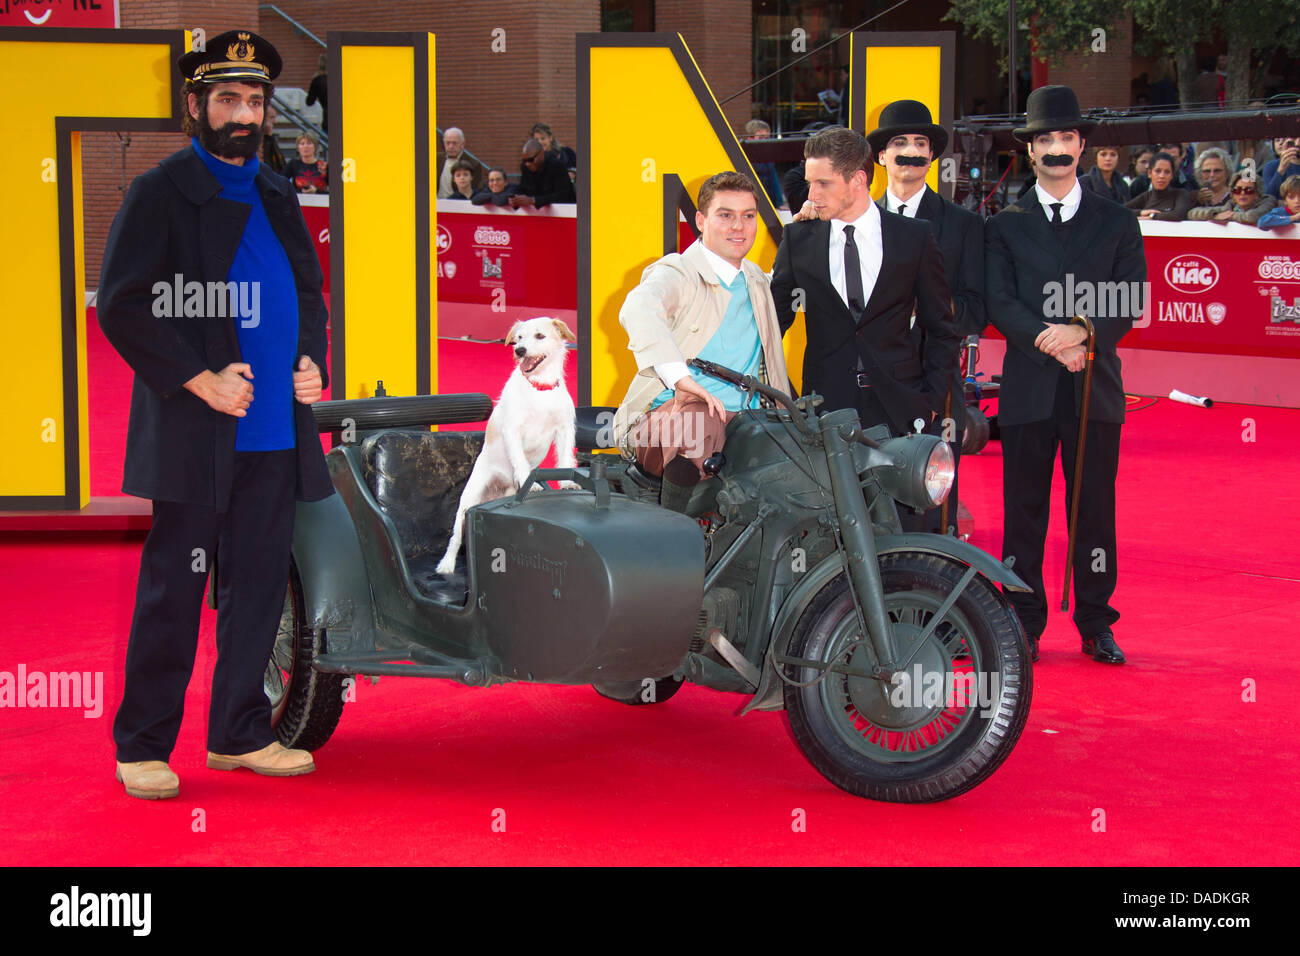 British actor Jamie Bell (3rd from R)and costume characters attend the premiere of his new film 'The Adventures Of Tin Tin' during the 6th International Rome Film Festival at Auditorium Parco Della Musica in Rome, Italy, on 28 October 2011. Photo: Hubert Boesl Stock Photo